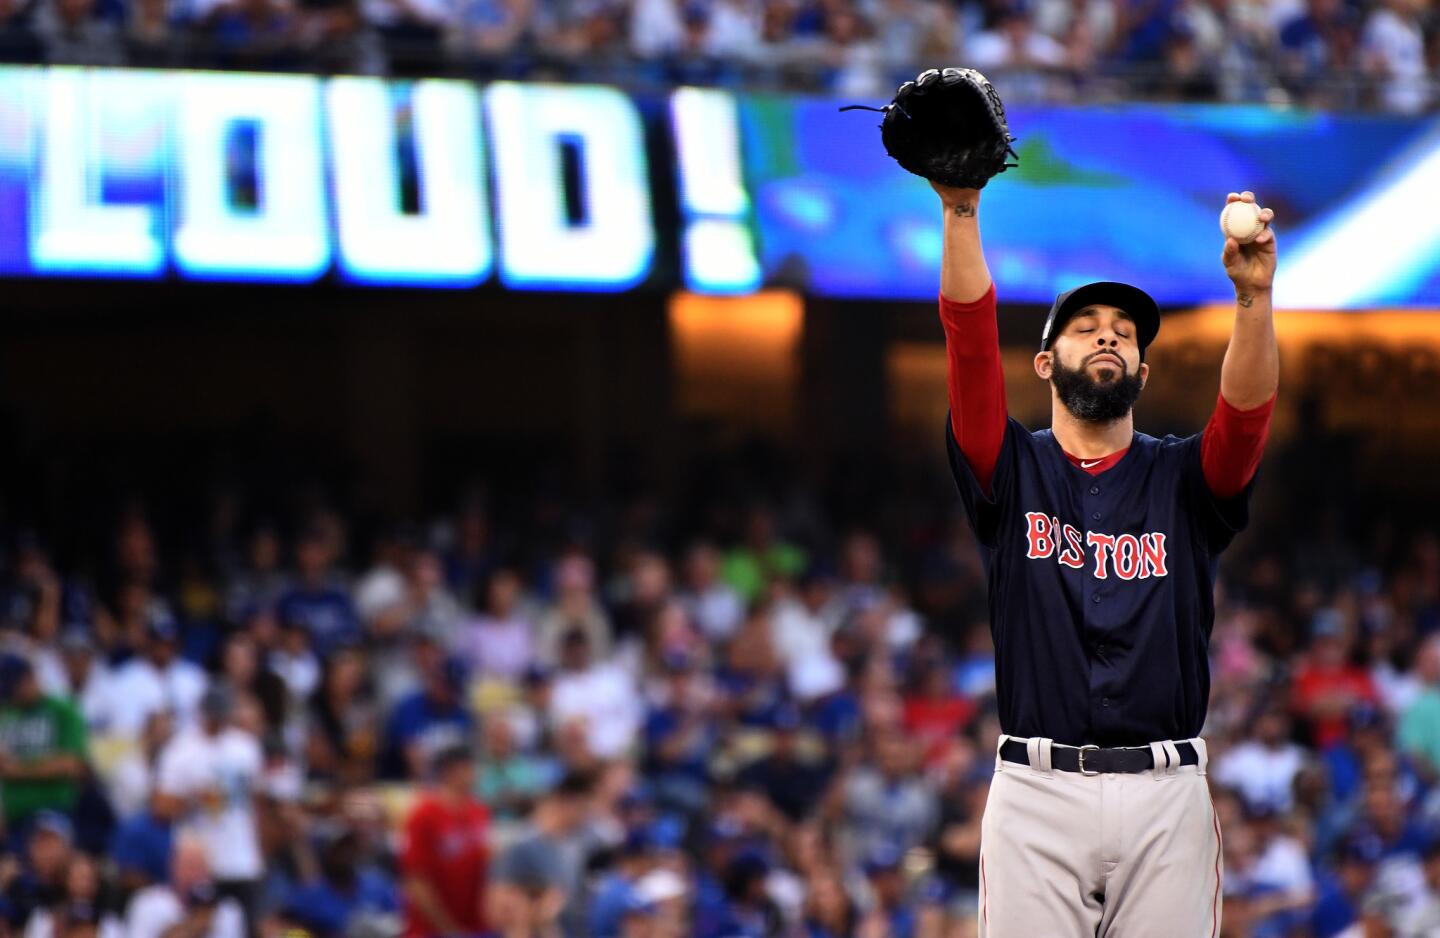 Red Sox pitcher David Price reacts after giving up a solo home run to Dodgers David Freese in the 1st inning.